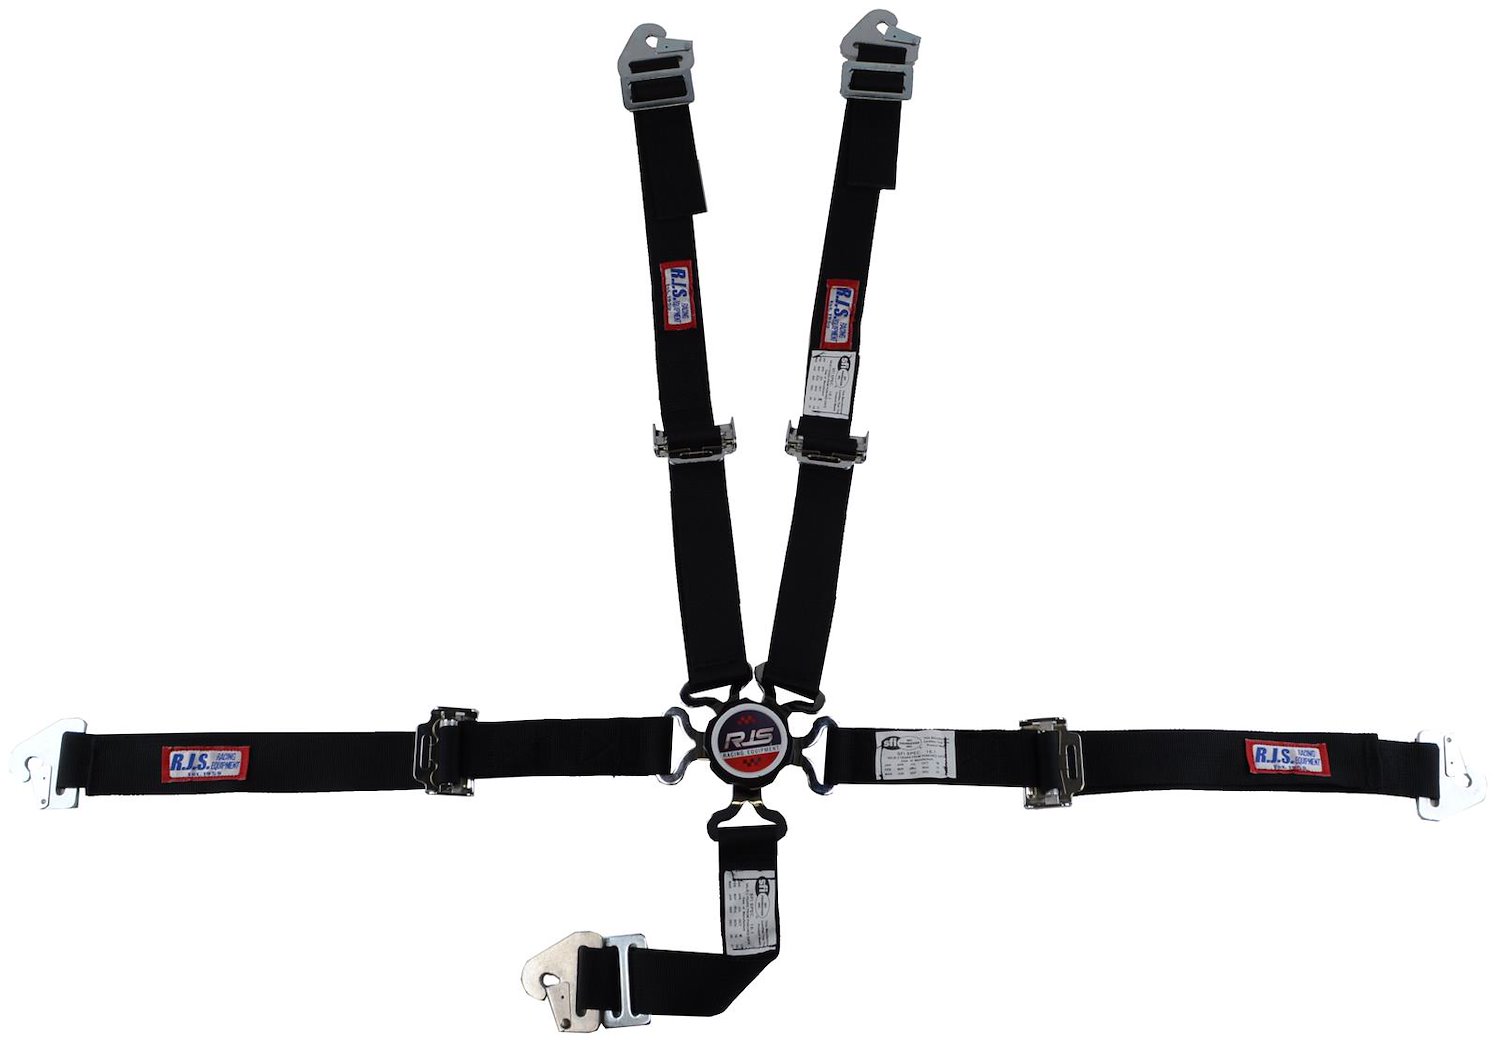 SFI 16.1 CAM-LOCK HARNESS 2 PULL UP Lap Belt 2 Shoulder Harness Individual ROLL BAR Mount 2 DOUBLE Sub ALL WRAP ENDS BLUE